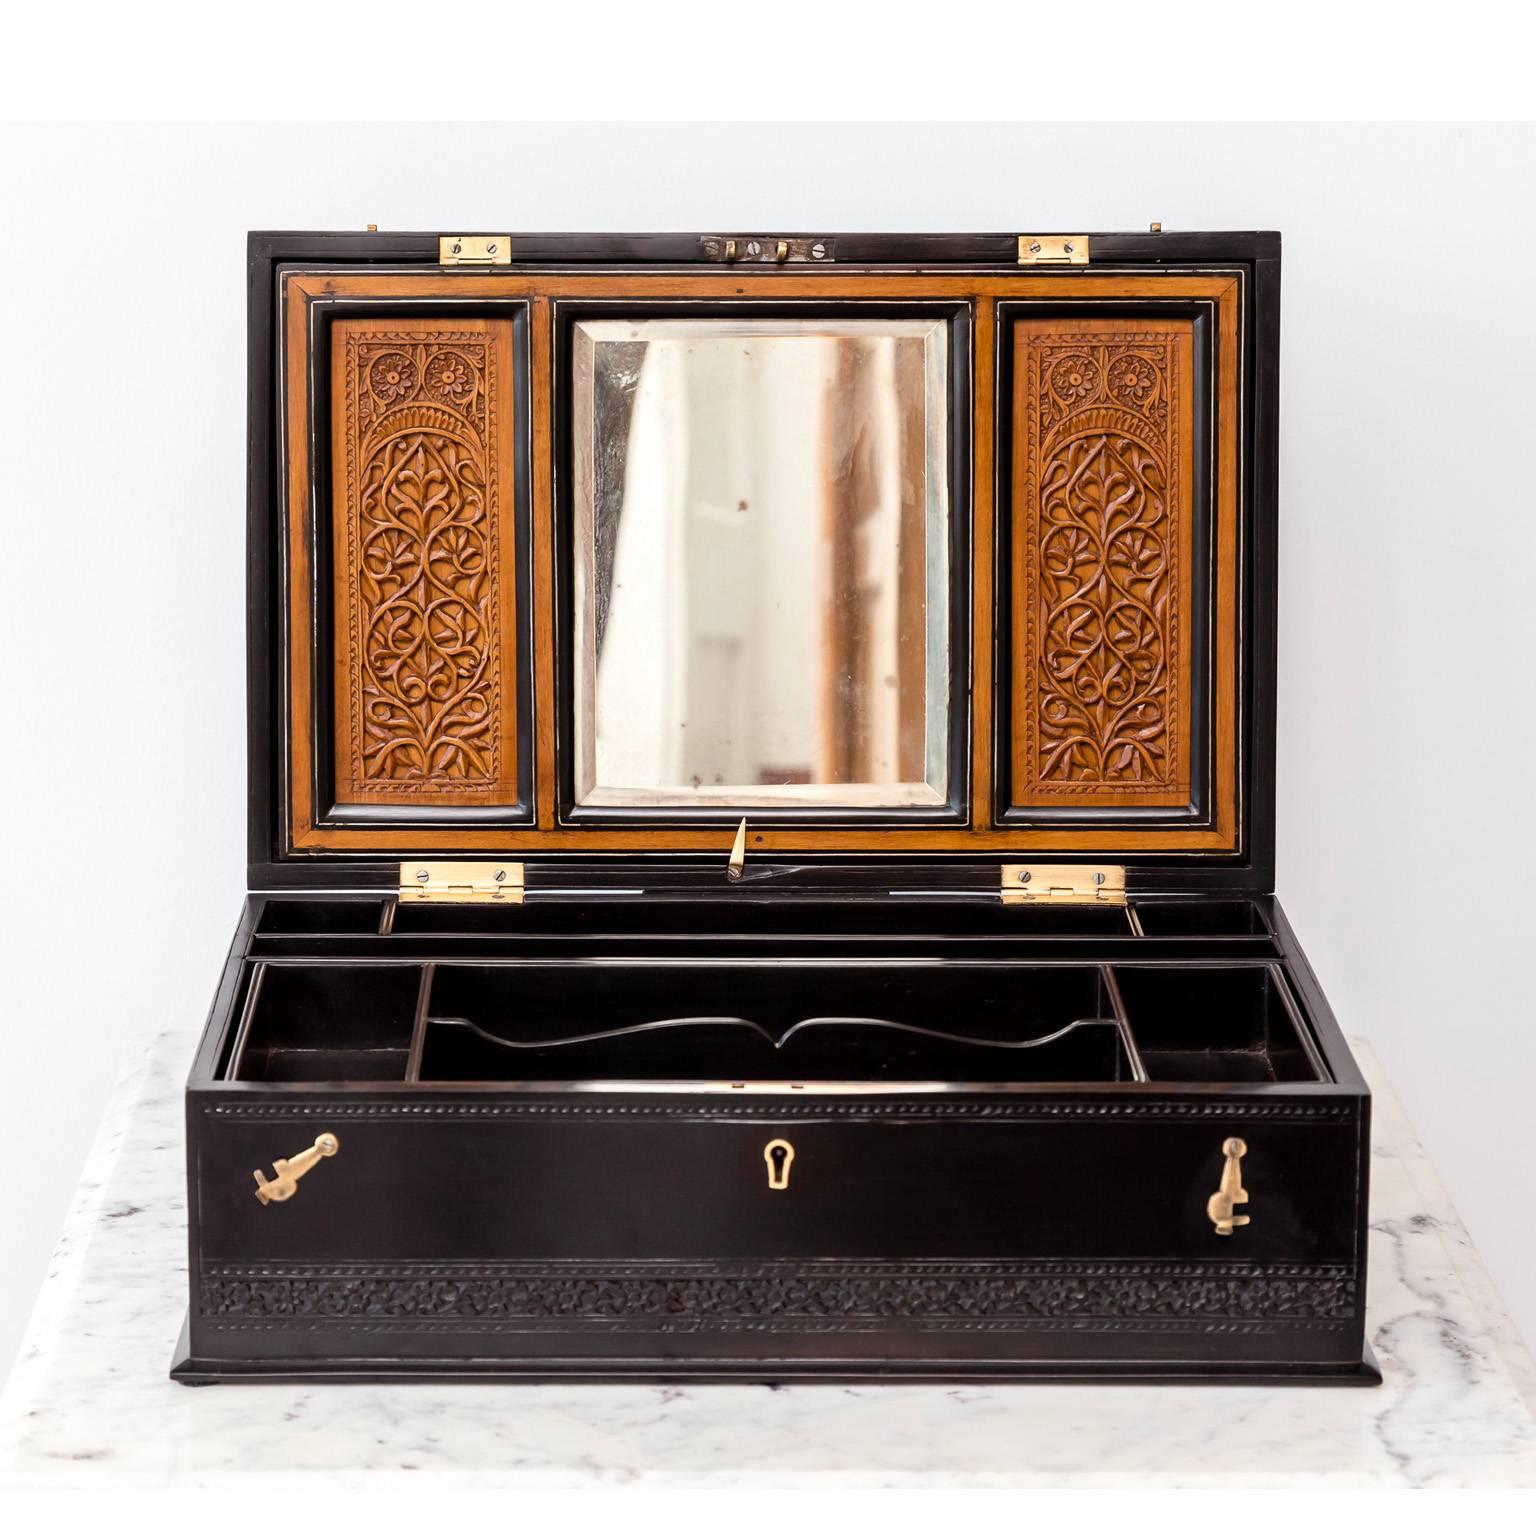 A beautiful British Colonial dressing box in ebony. On the top and sides the box has bands of foliage Moghul style carving. It opens to reveal an interior with a mirror flanked by beautifully carved foliage in sandalwood, several small compartments